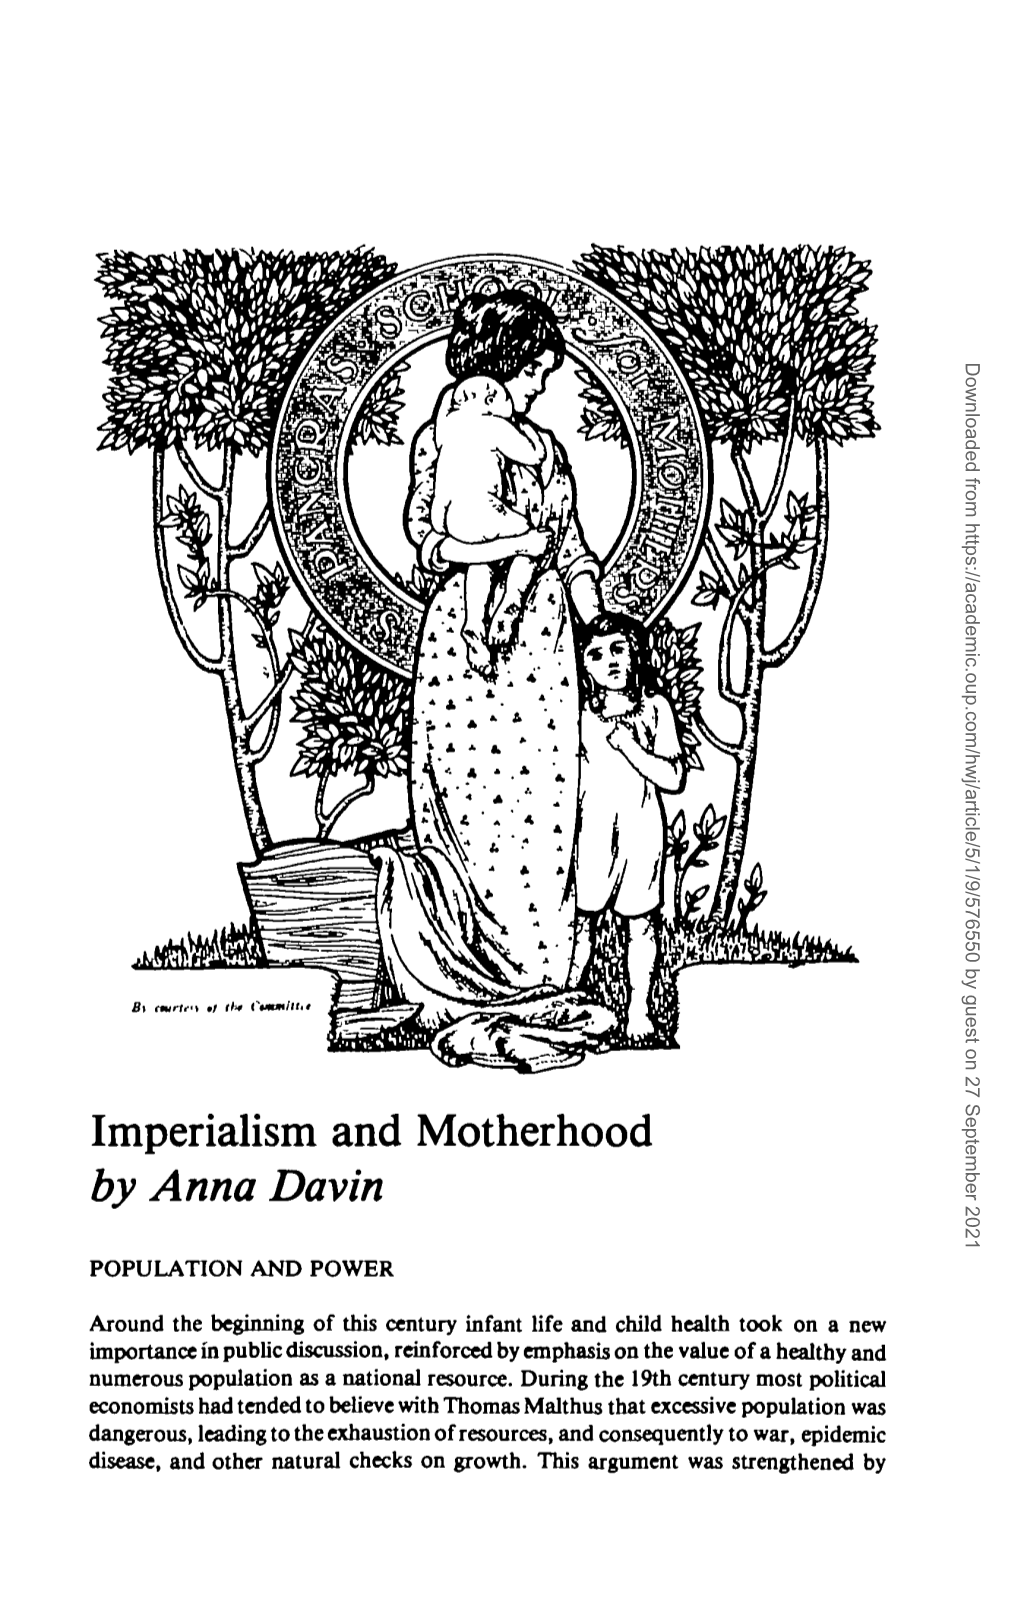 Imperialism and Motherhood by Anna Davin